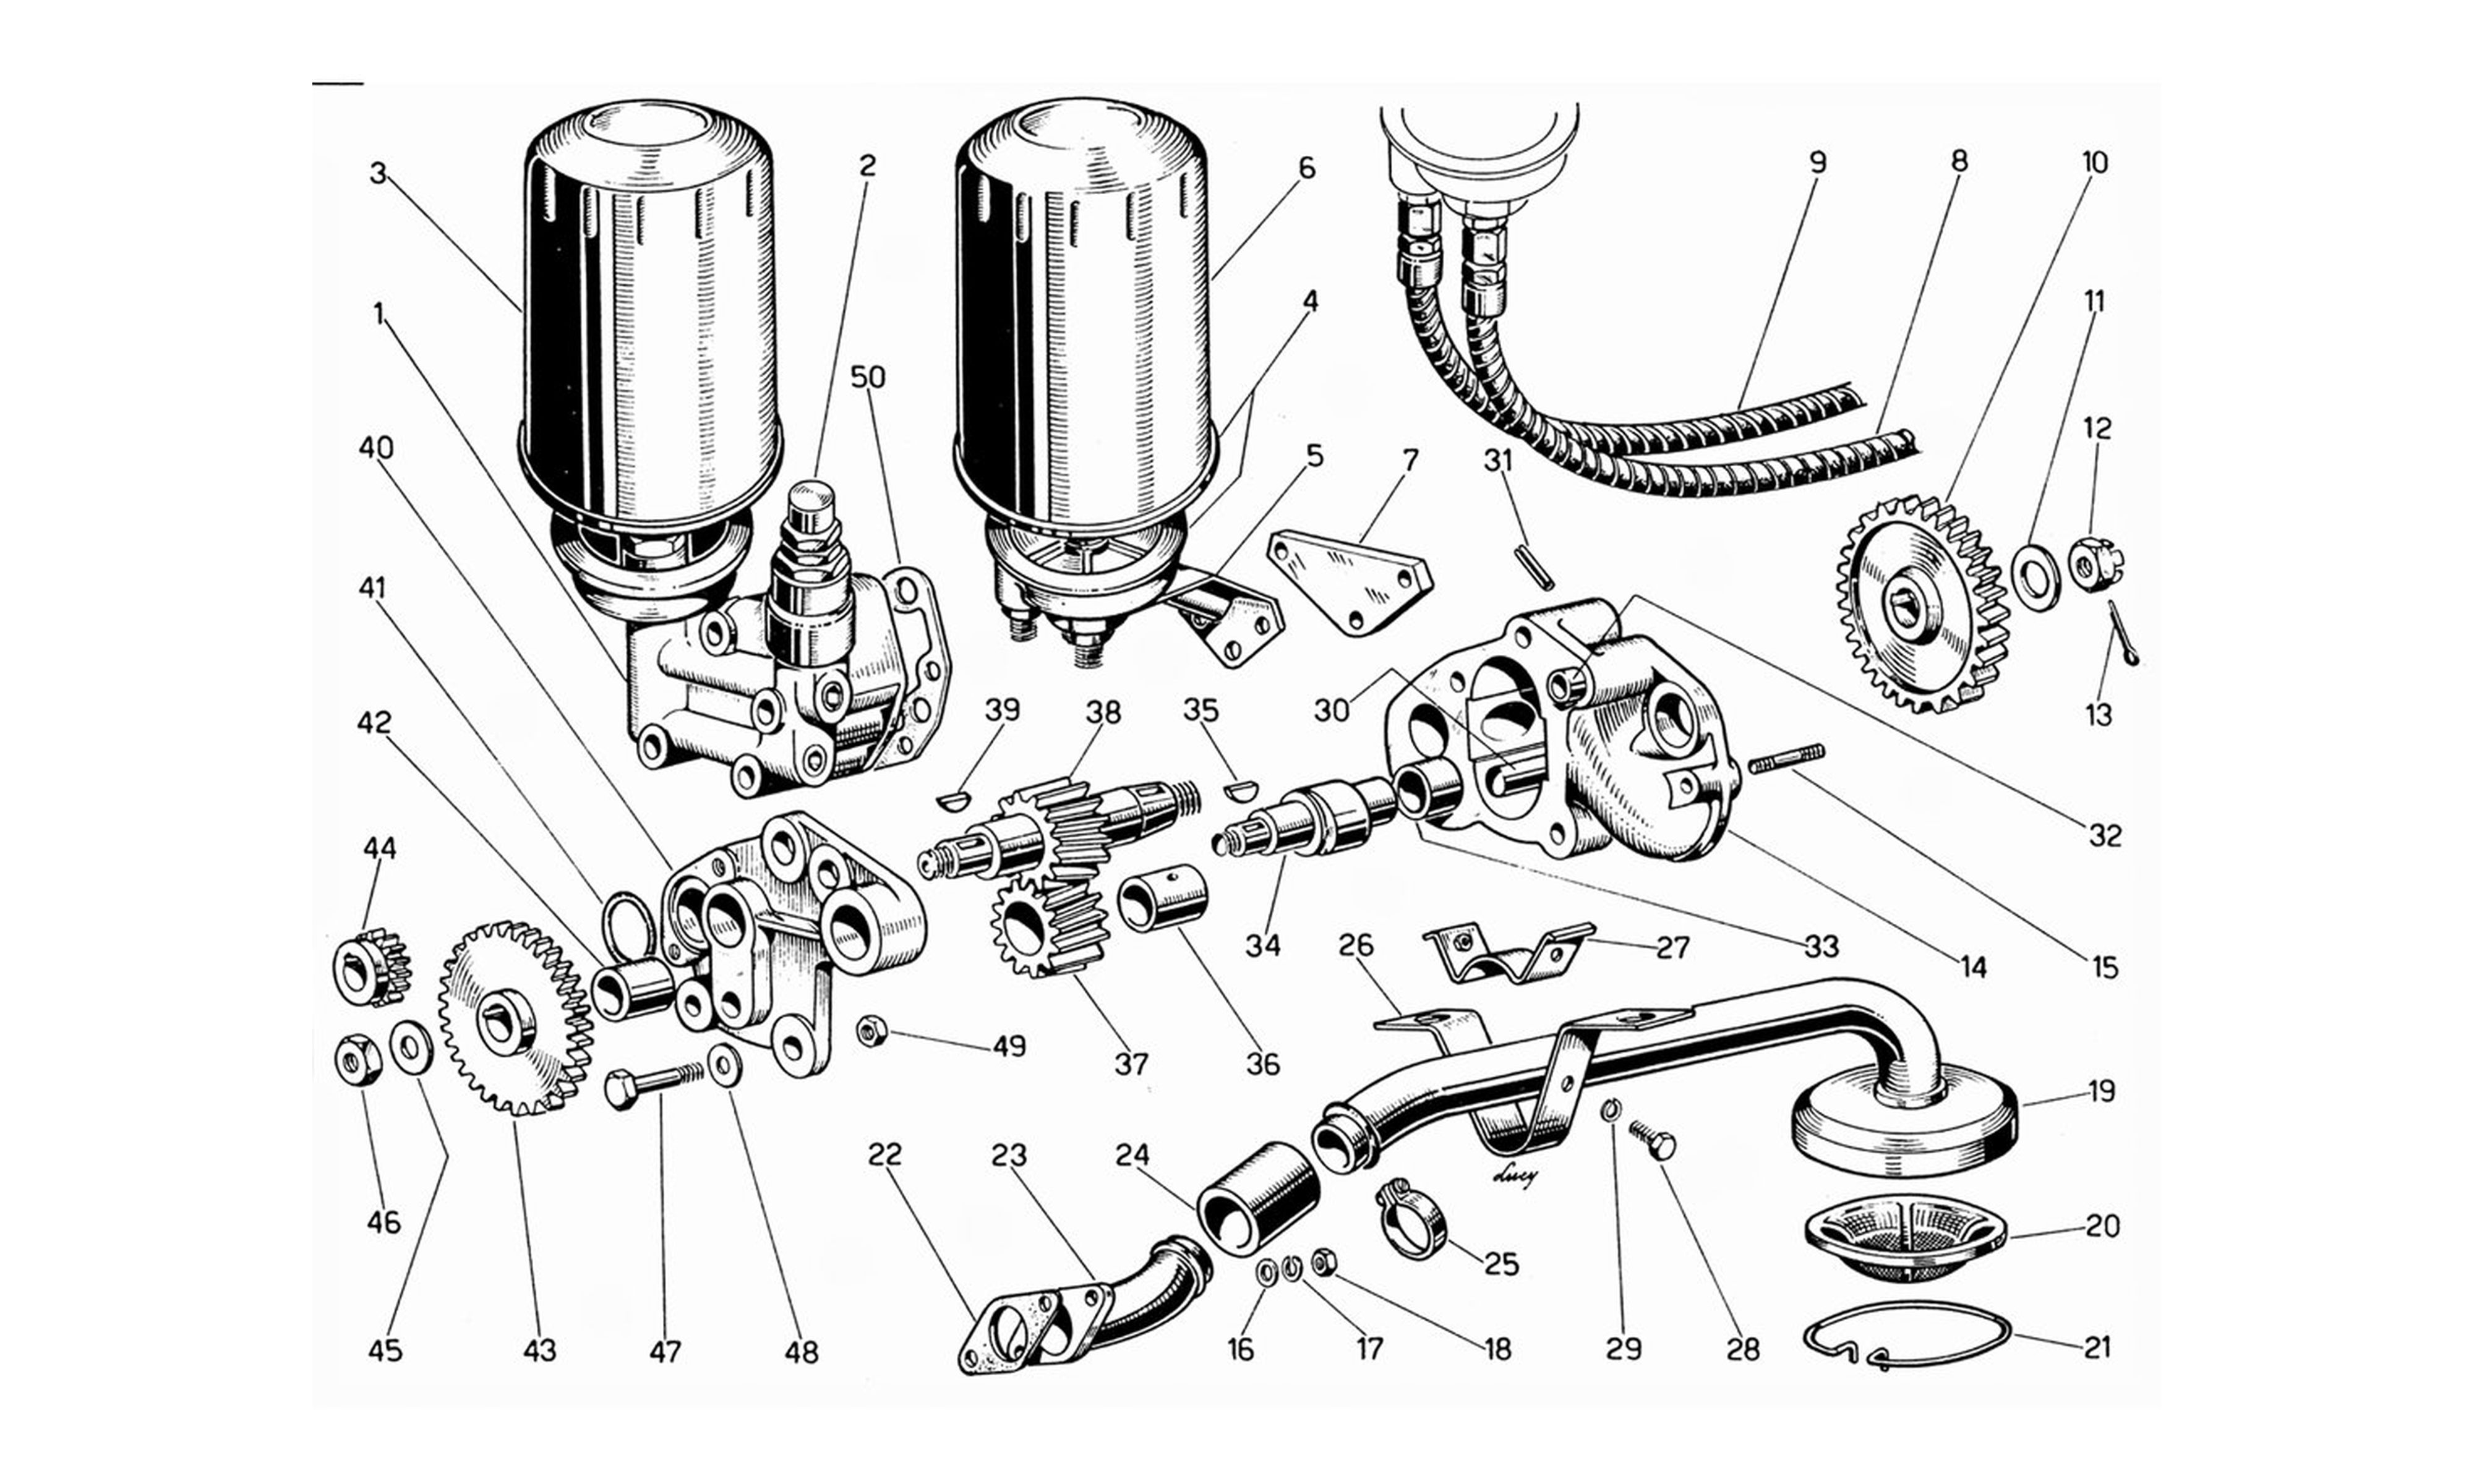 Schematic: Oil Pump and Filters